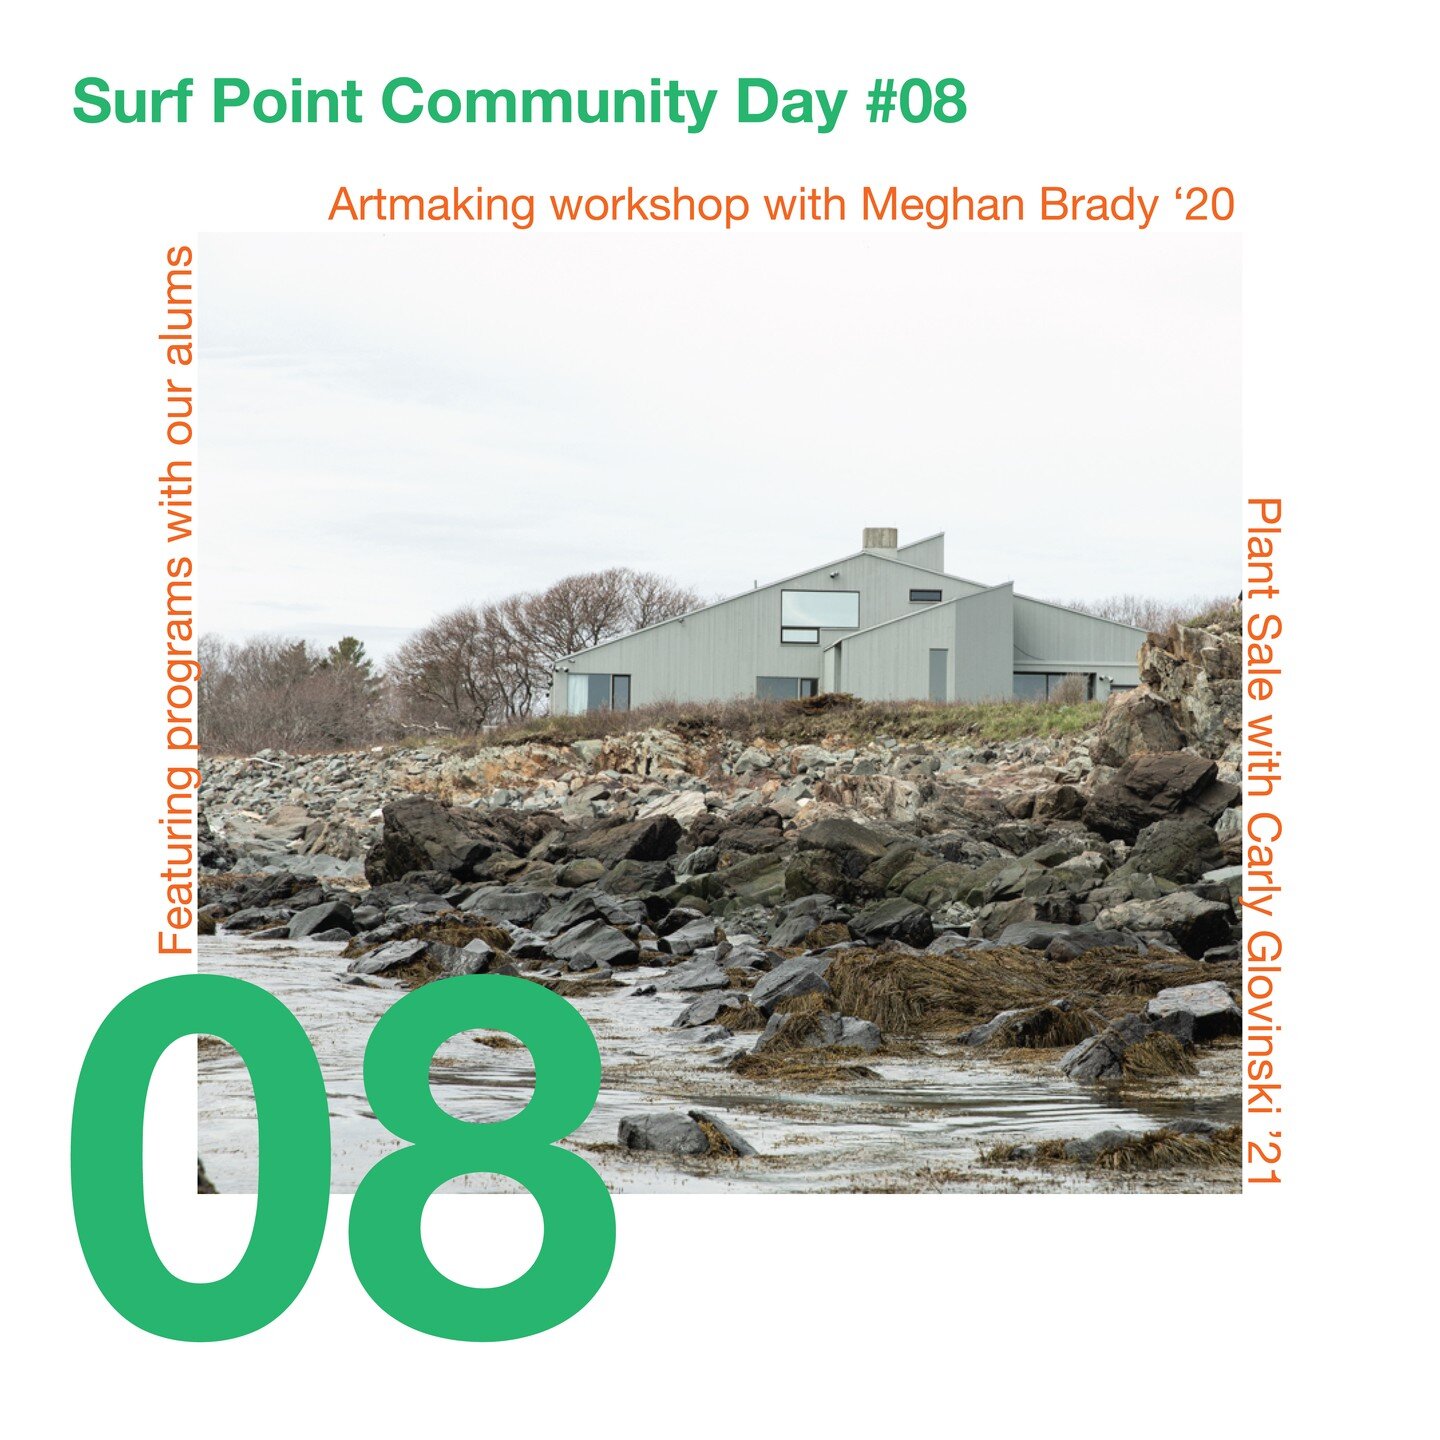 Join us for Community Day #08 from 11am to 3pm on Saturday, April 27, at Surf Point&mdash;featuring @meghanbrady, @cglovinski, and the @york_land_trust! Link in bio for free registration.

Schedule of events:

11:30am - 12:30pm: An exploration of Sur